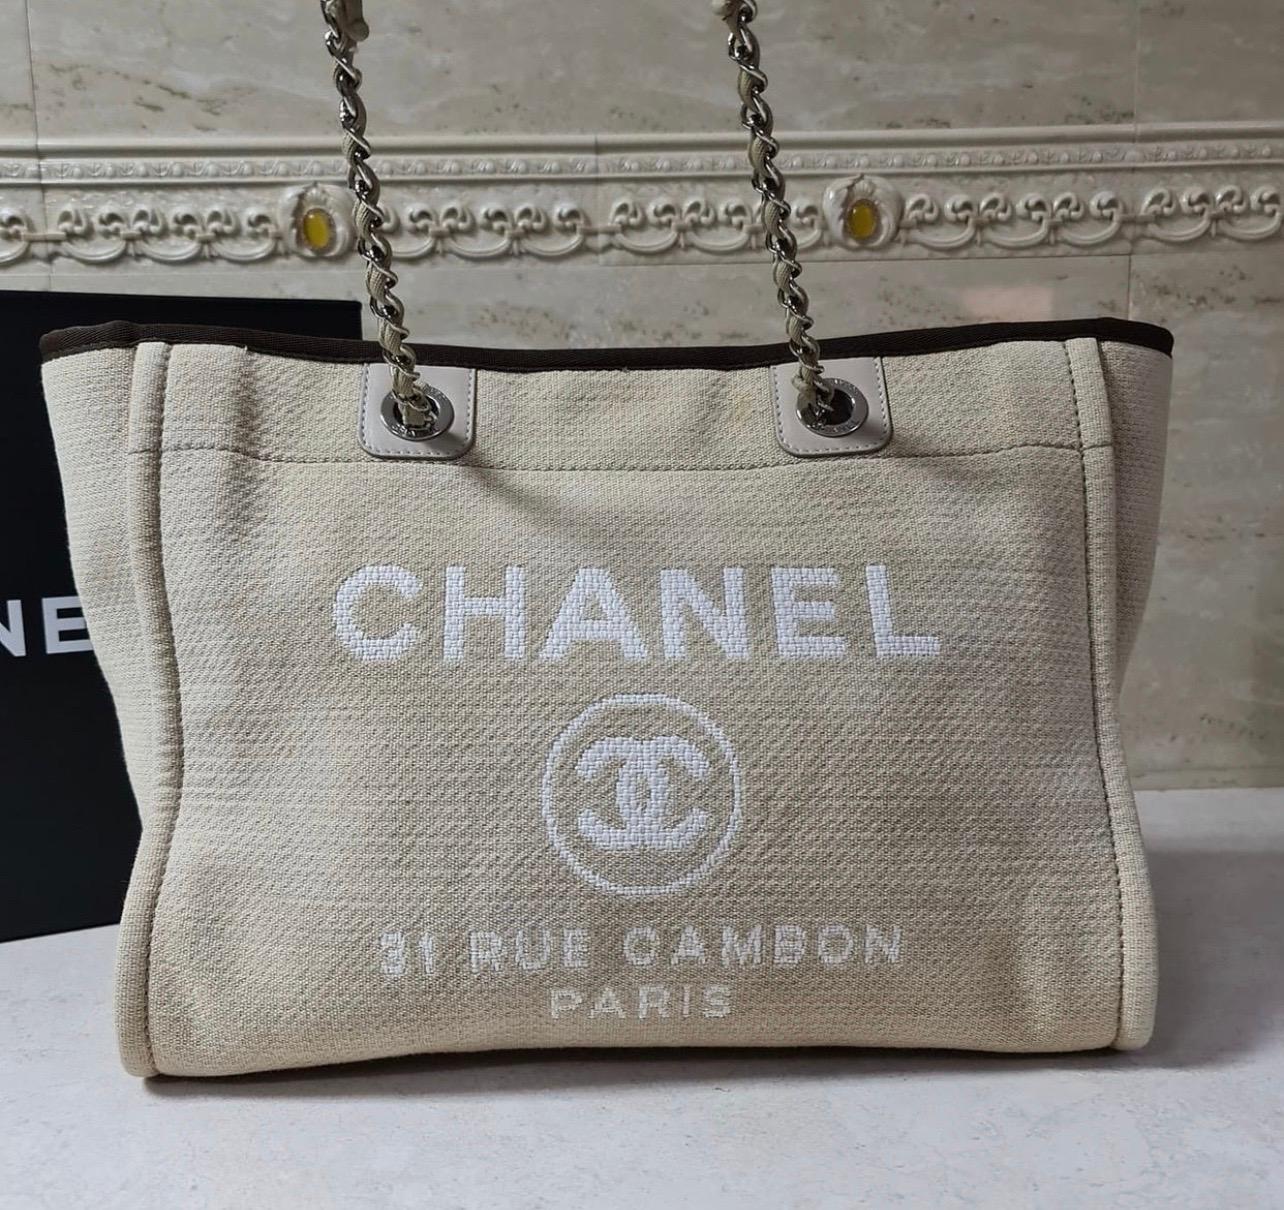 Chanel Beige/Silver Tweed Deauville Small Tote

34*26*16 cm

13.25” width at base, 10.25” height, 5.75” depth

Very good condition.

No original packaging.

For buyers from EU we can provide shipping from Poland. Please demand if you need.